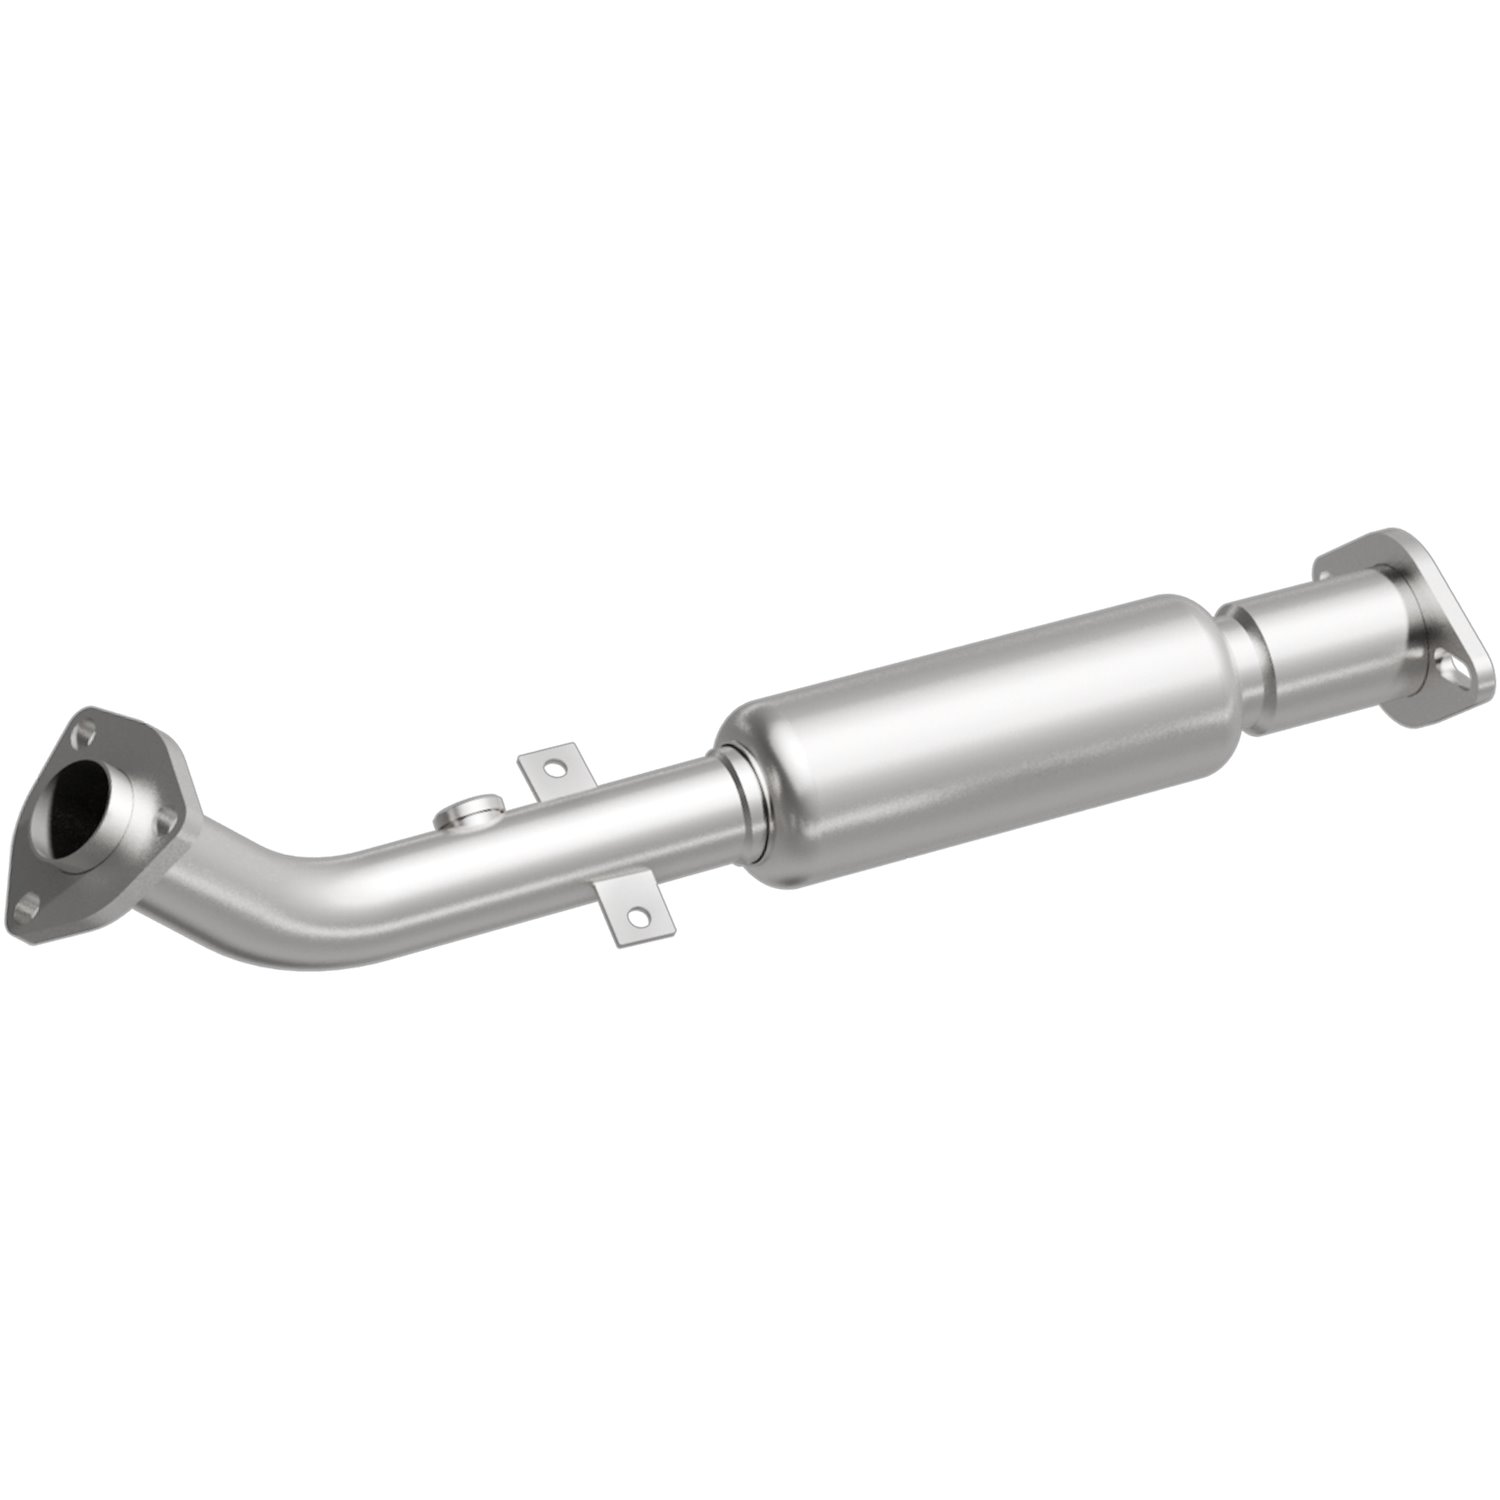 Direct-Fit Exhaust Resonator and Pipe Assembly, 1998-2004 Nissan Pathfinder, Infiniti QX4